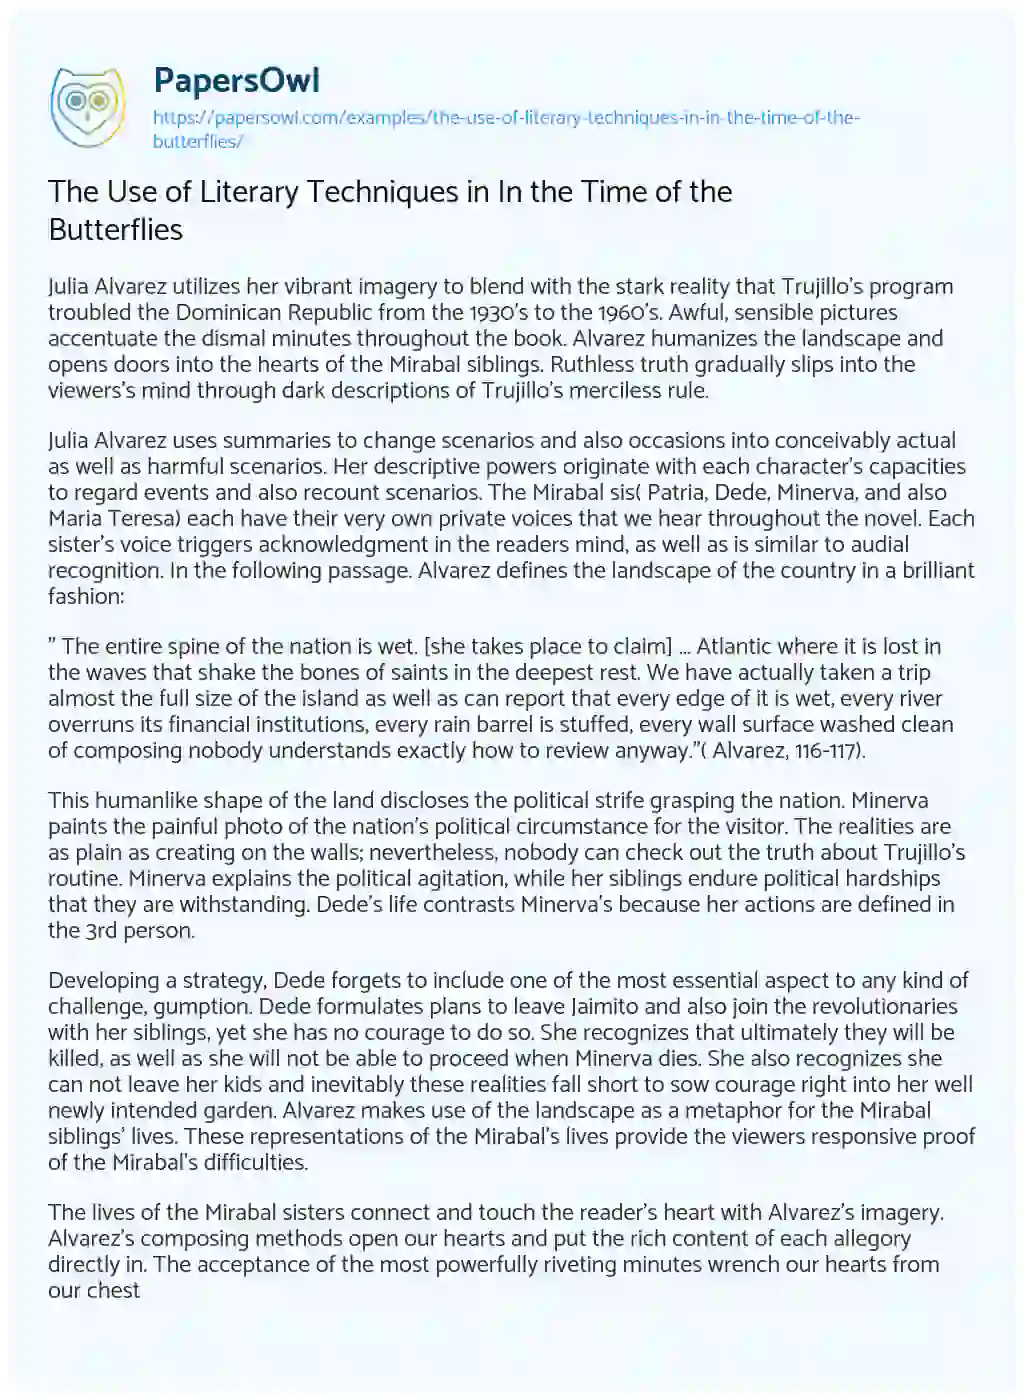 Essay on The Use of Literary Techniques in in the Time of the Butterflies